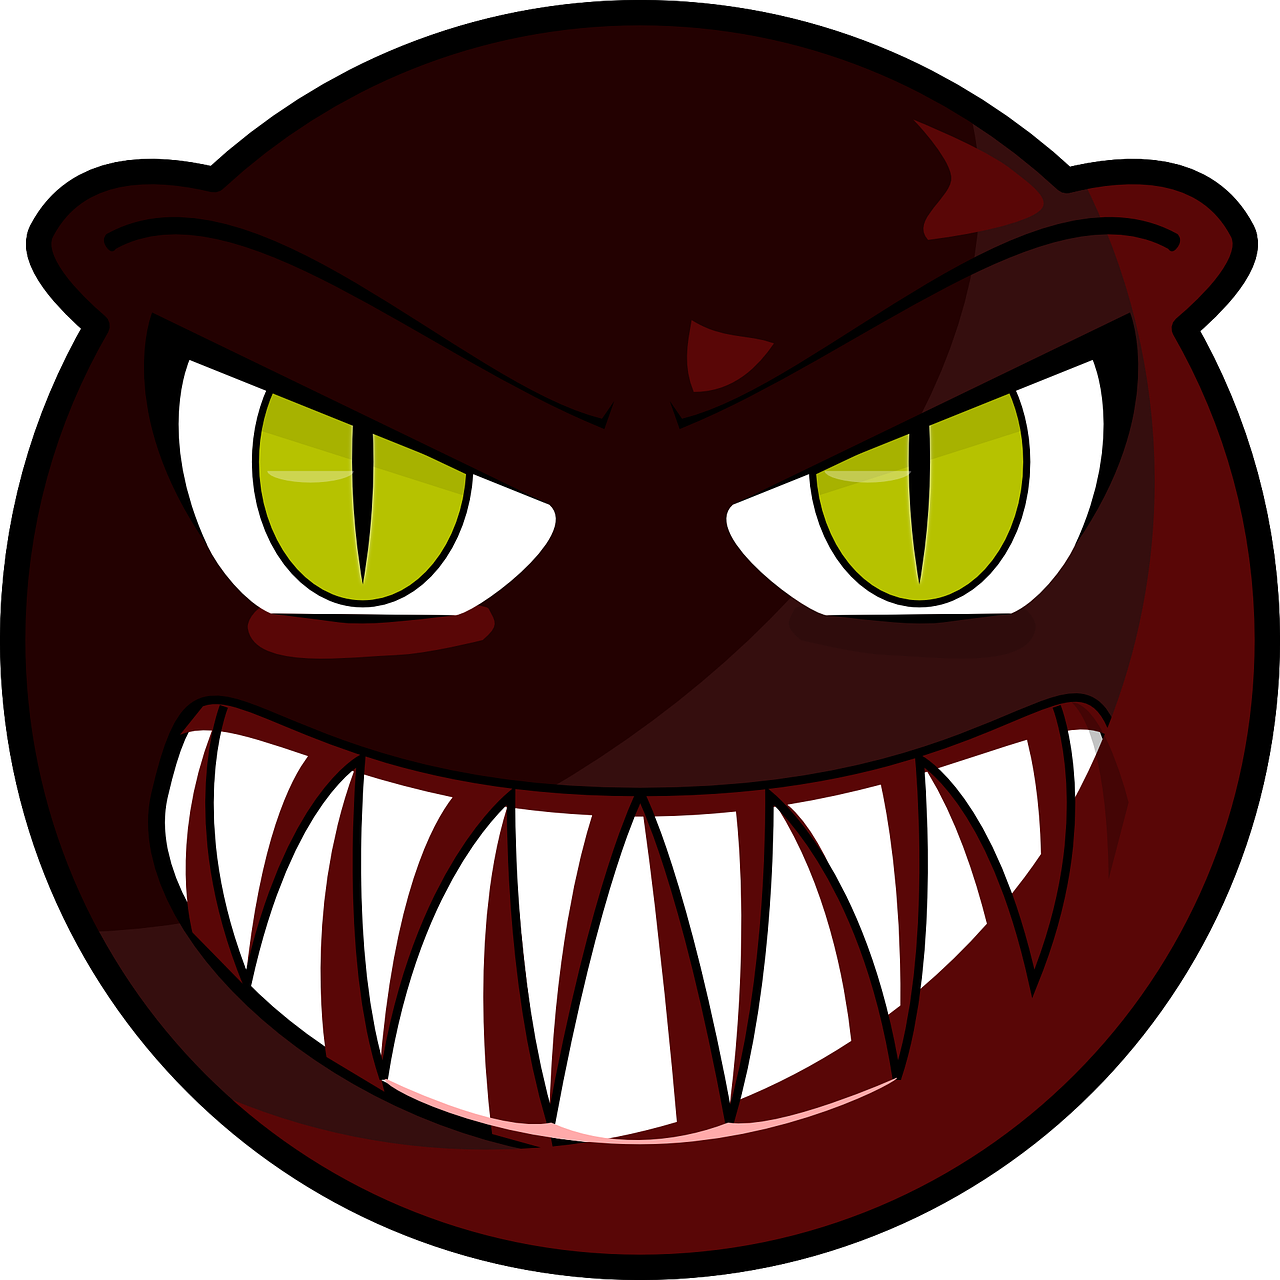 angry smiley face expression free photo